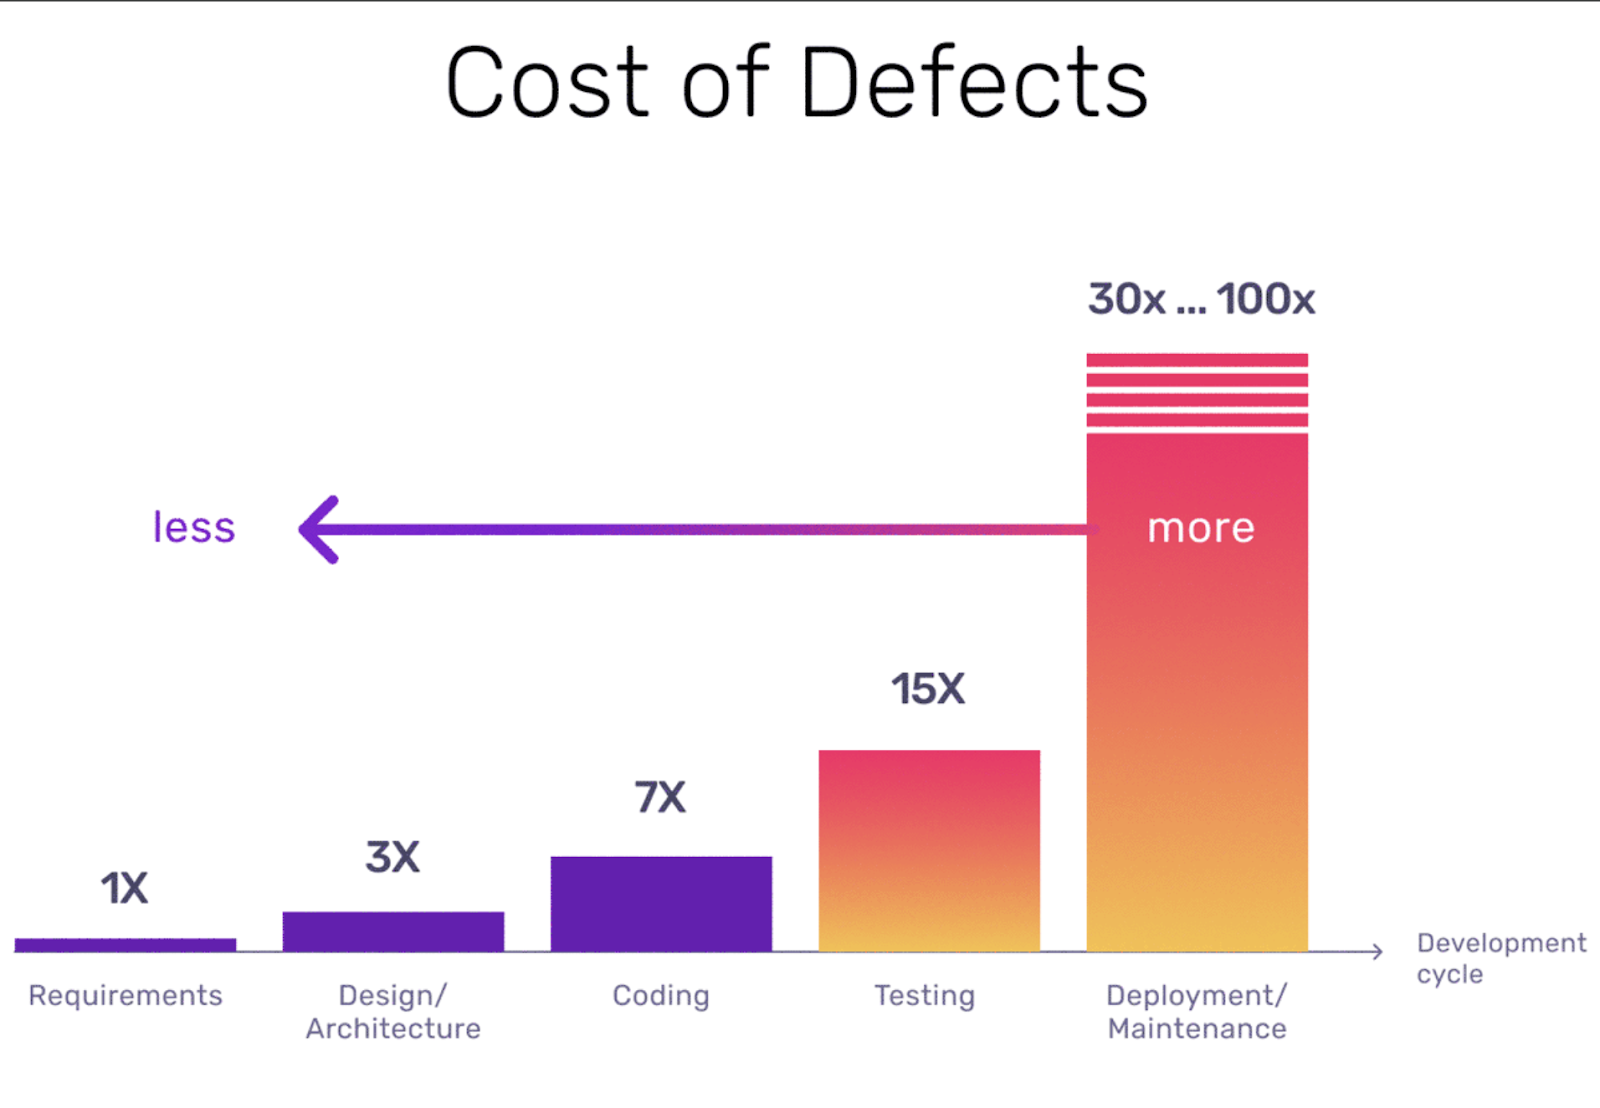 Cost of defects